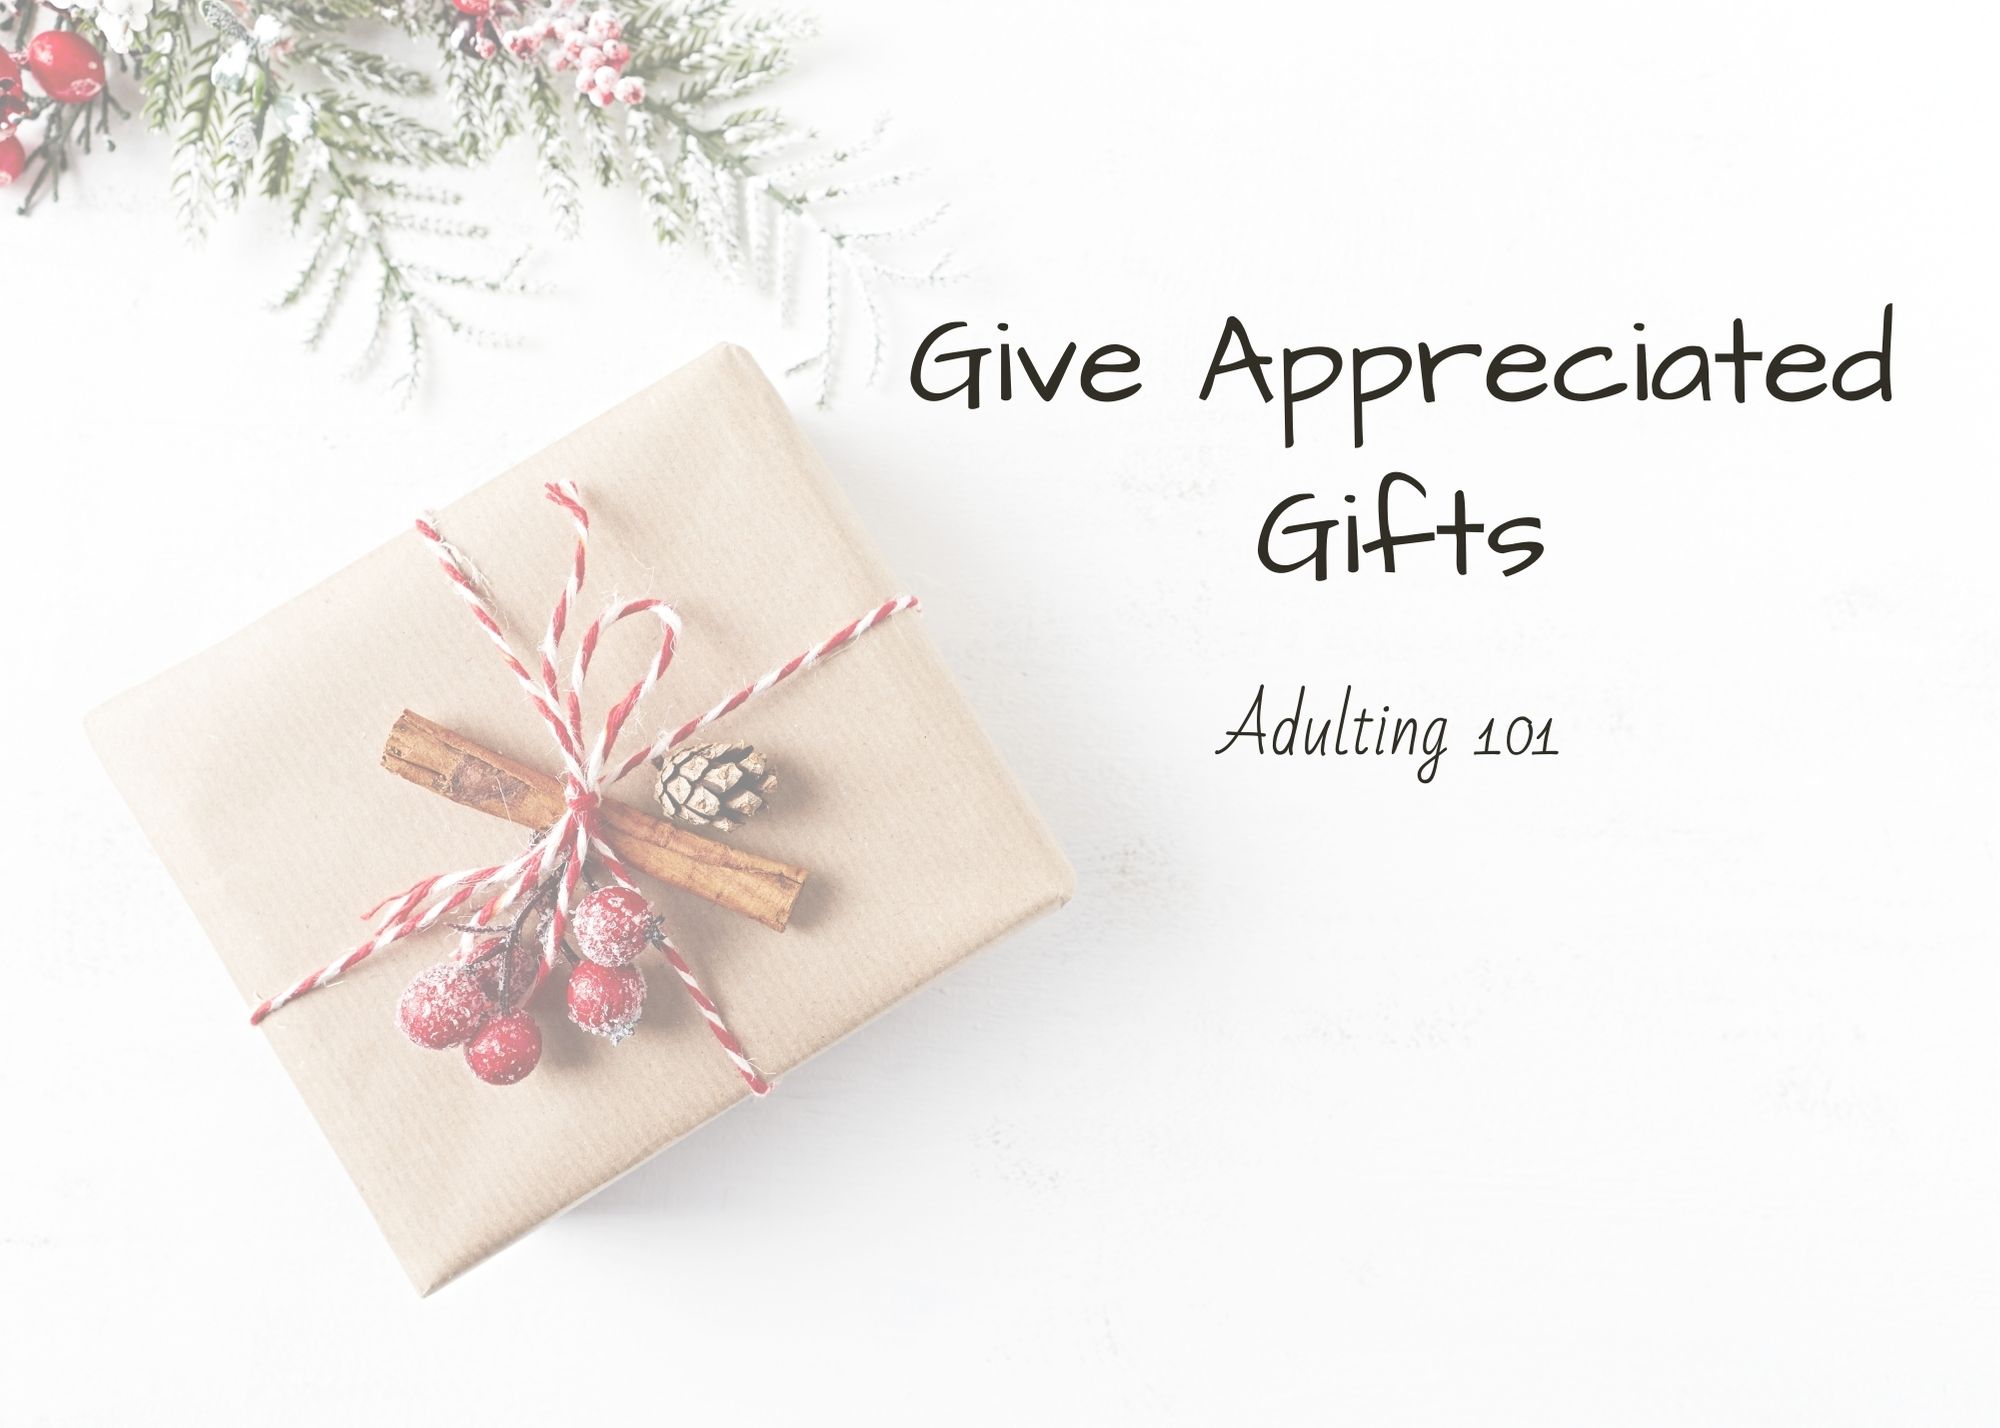 Give Appreciated Gifts STEM 911